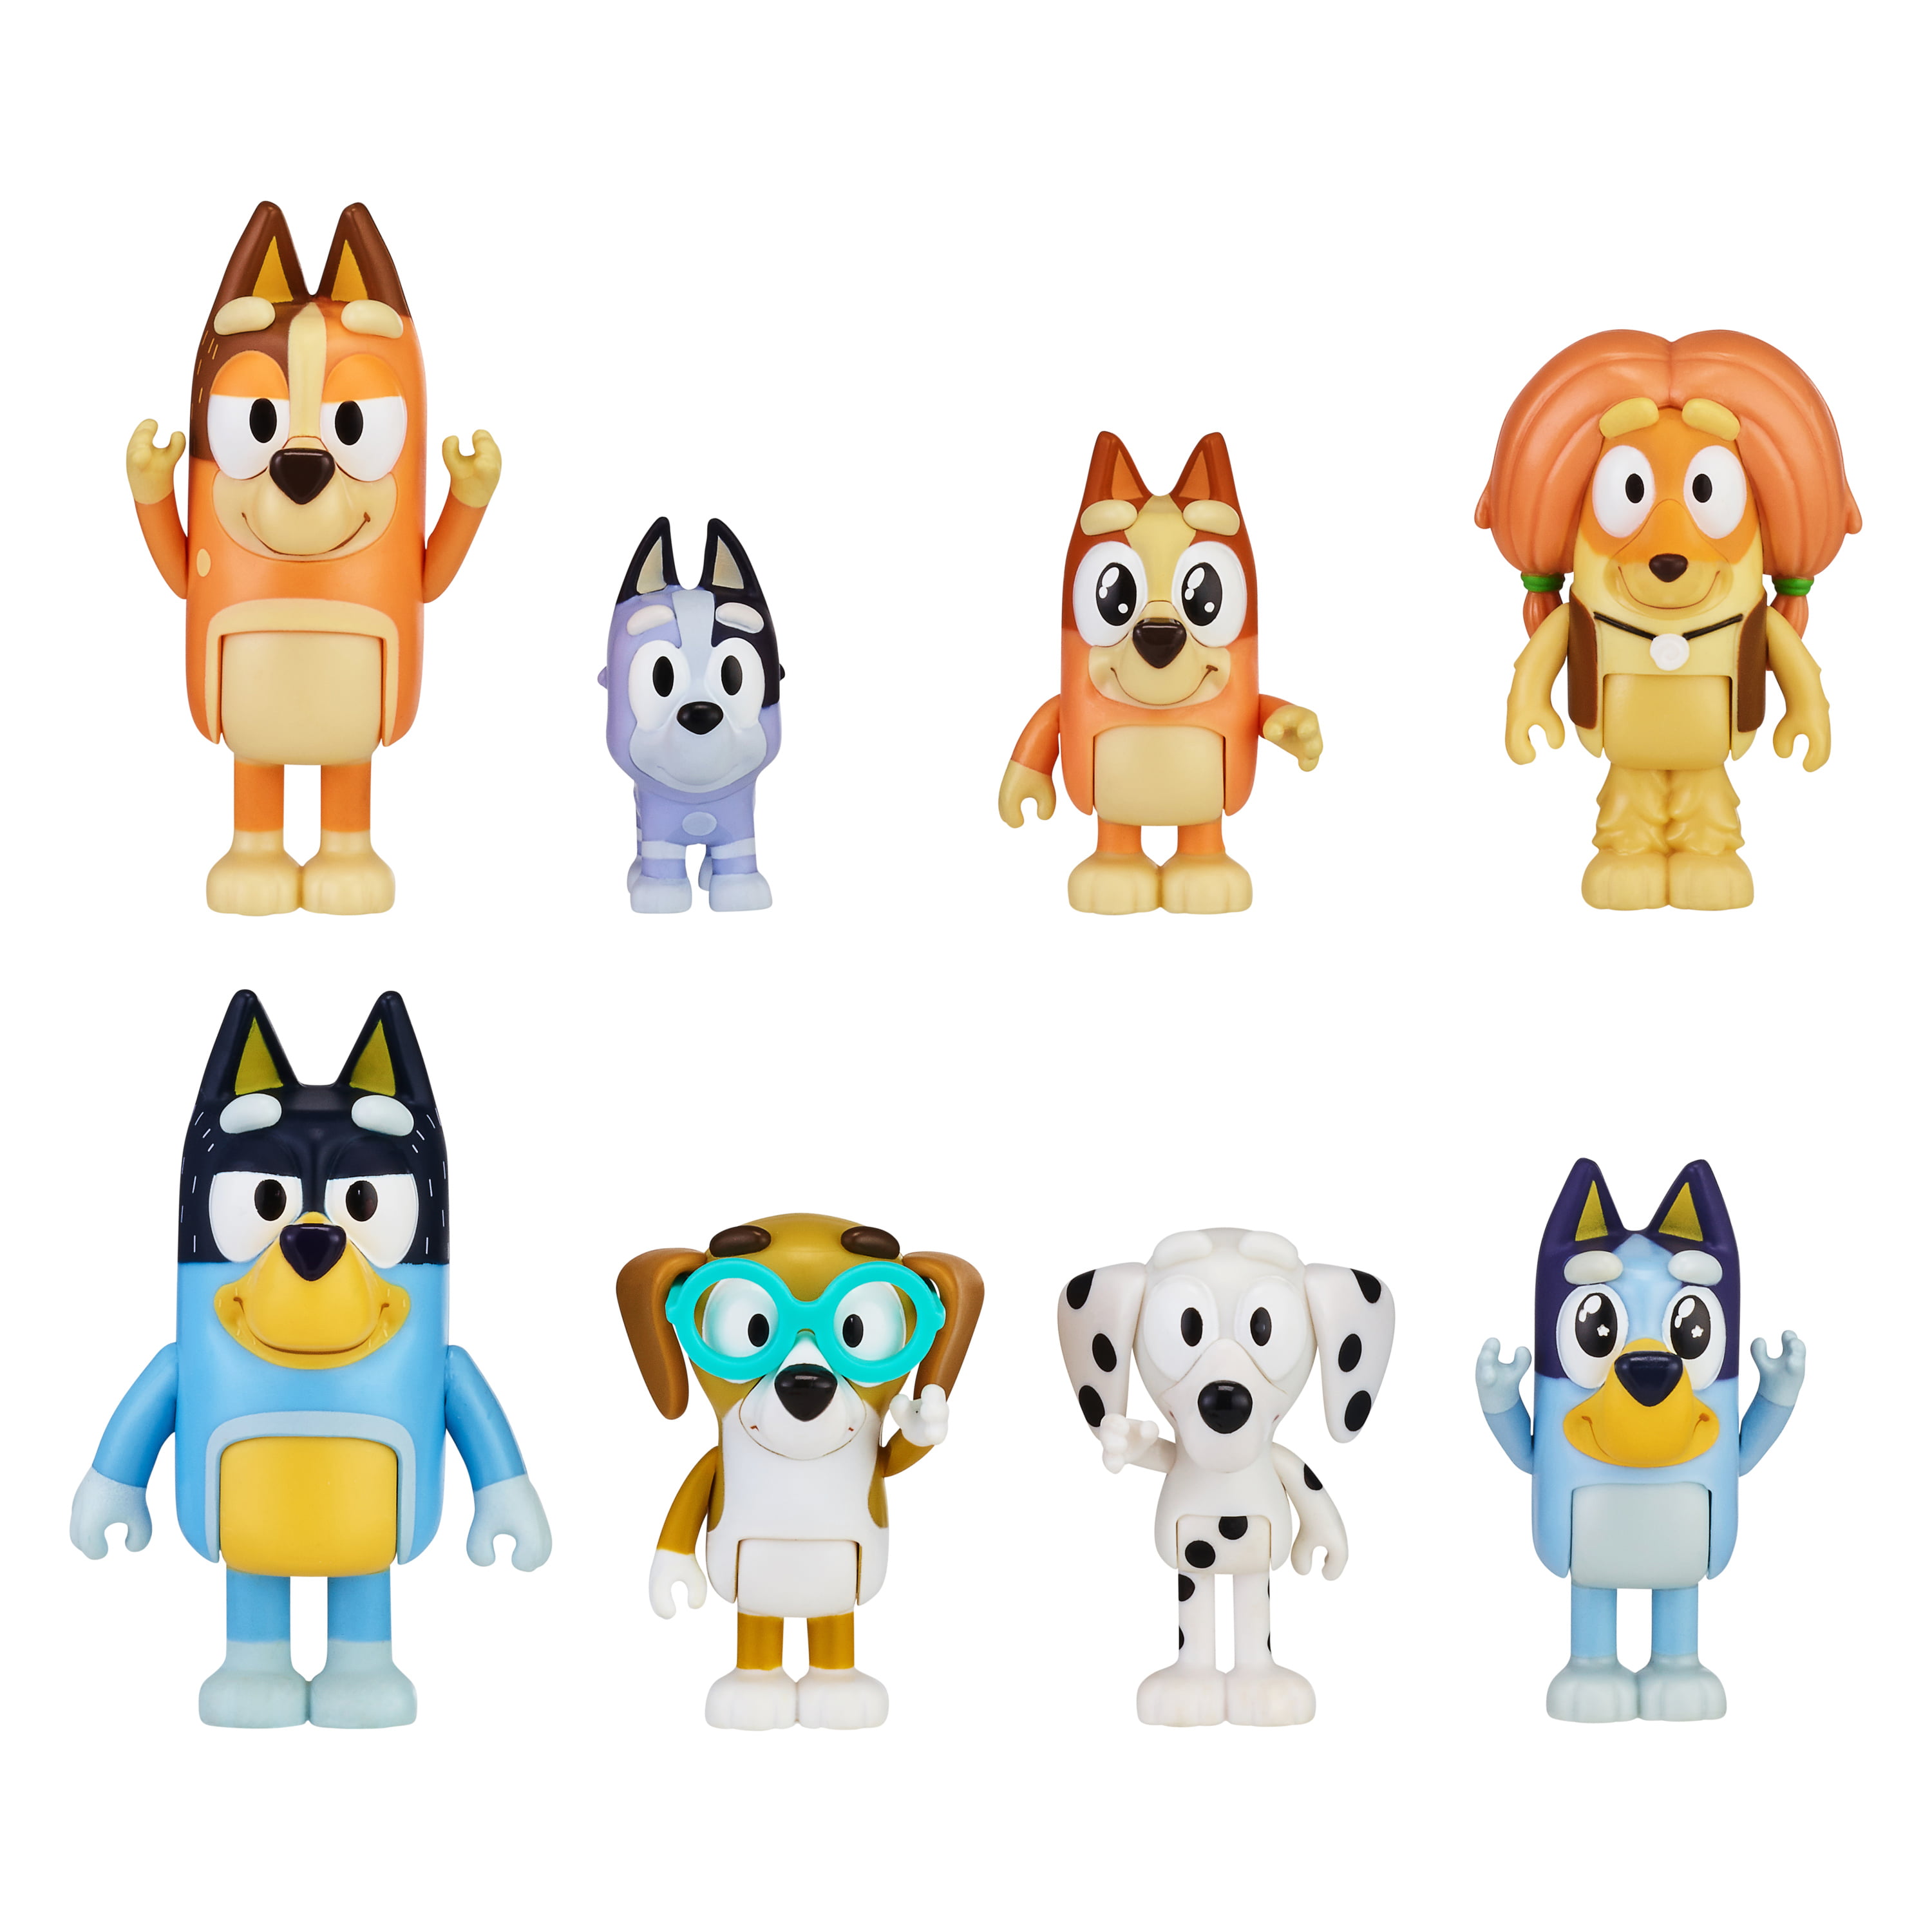 Bluey's Family And Friends Pack.5 3 Bluey, Bingo, Chilli (Mum) And Dad (Bandit), Honey, Socks, Chloe And Indy Figures